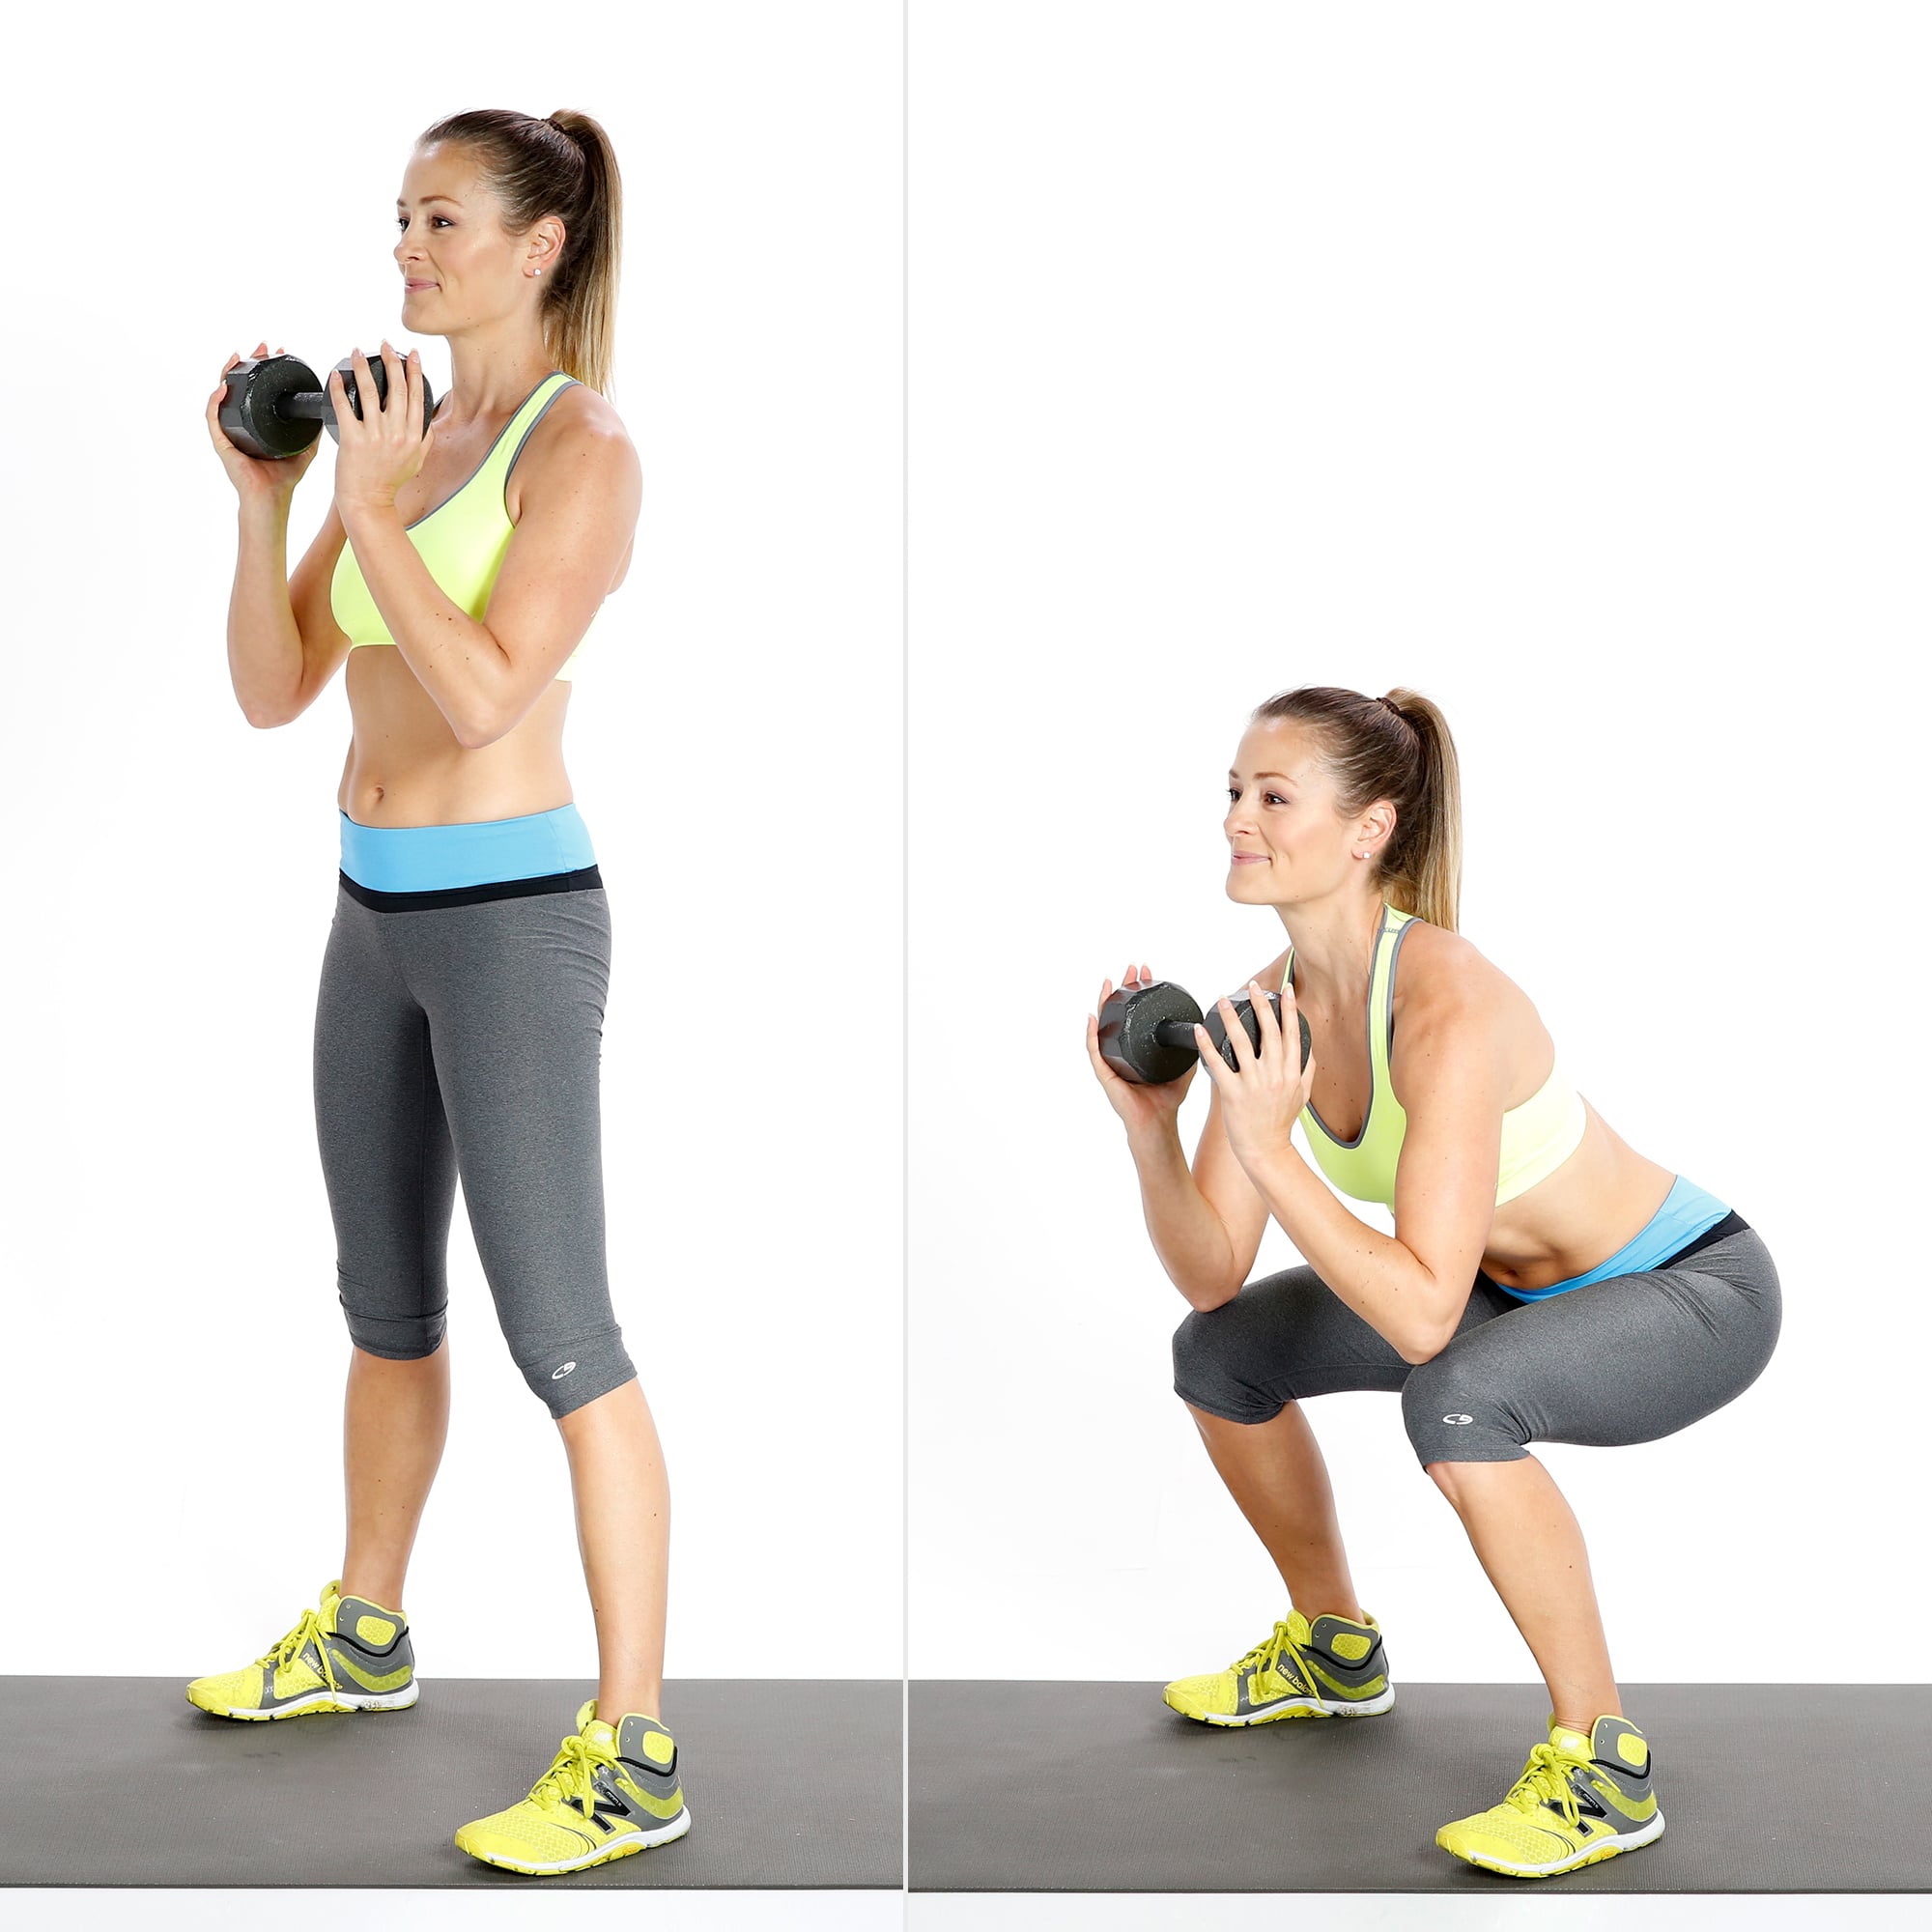 Goblet Squats | Feel the Burn! 7 Ways to Work Your Body With Squats | POPSUGAR Fitness Photo 4